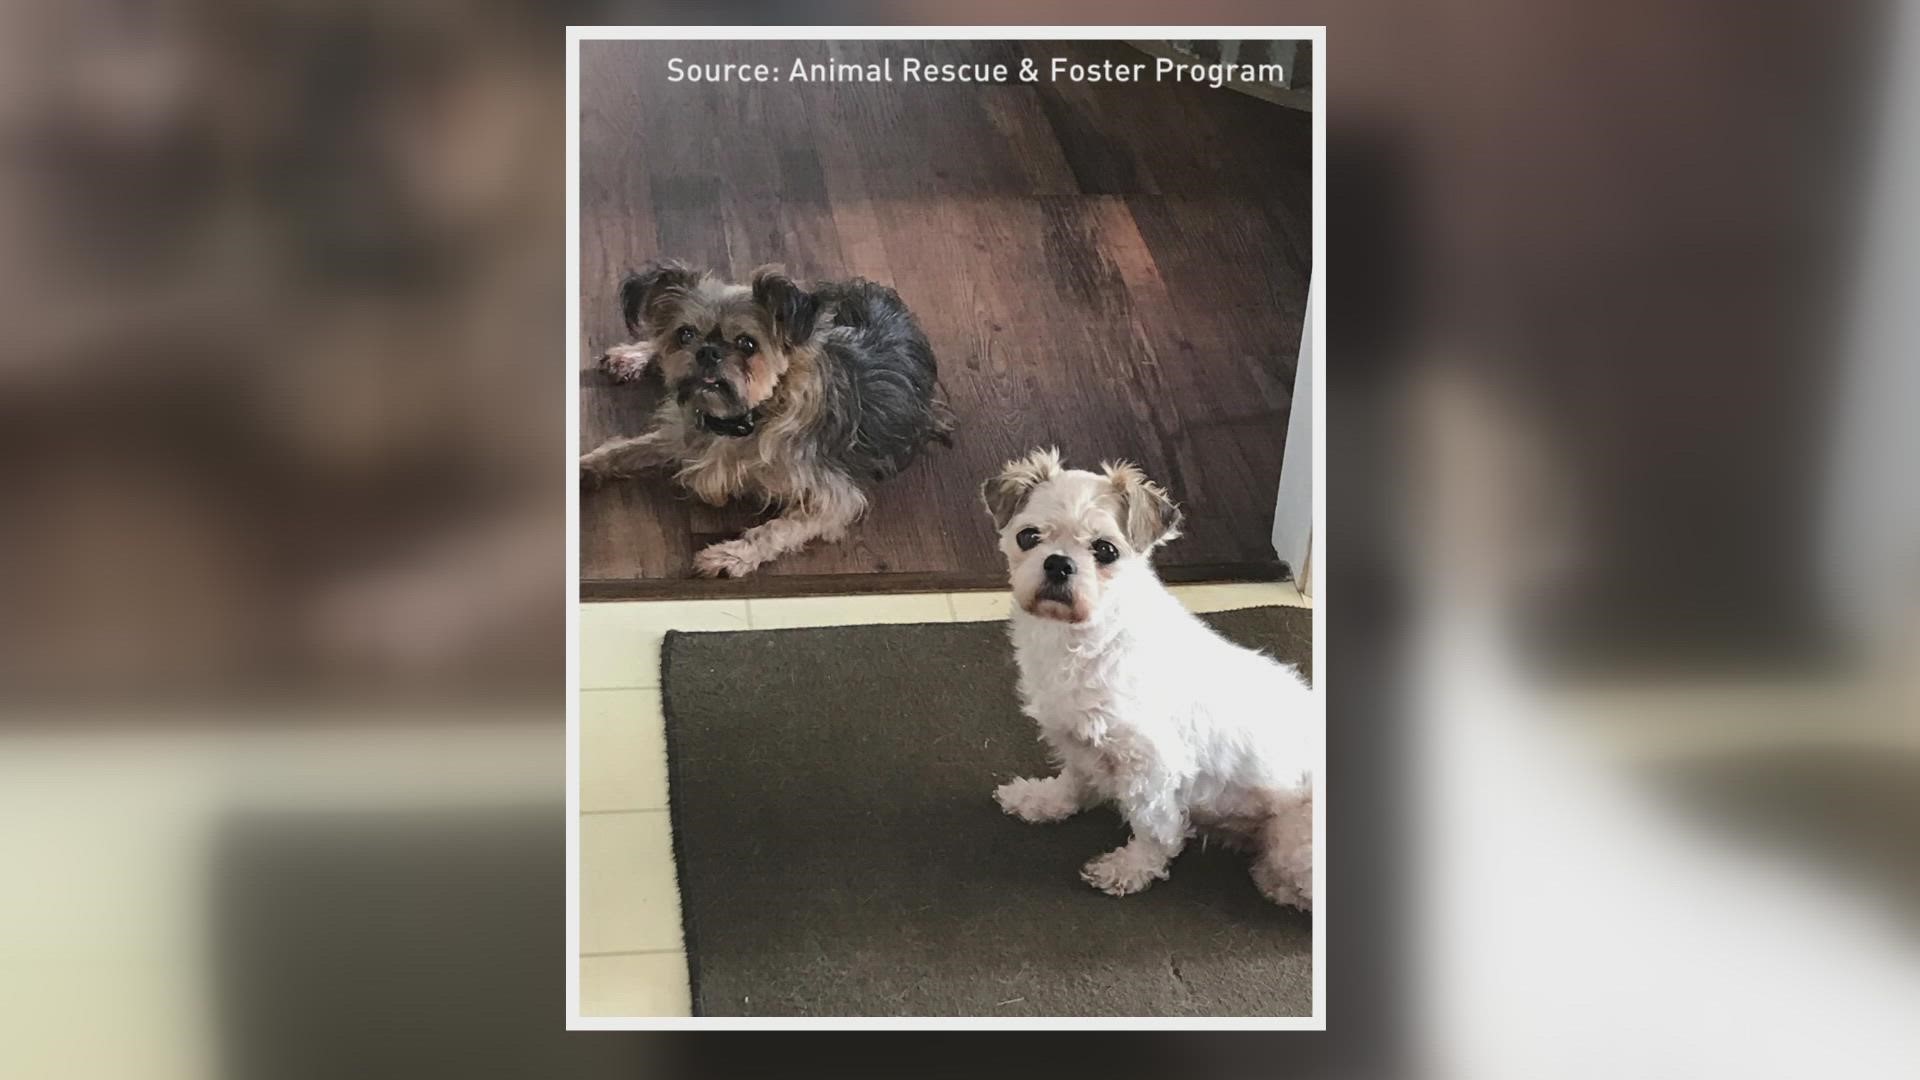 These boys were surrendered to the Animal Rescue and Foster Program due to their owner's illness.